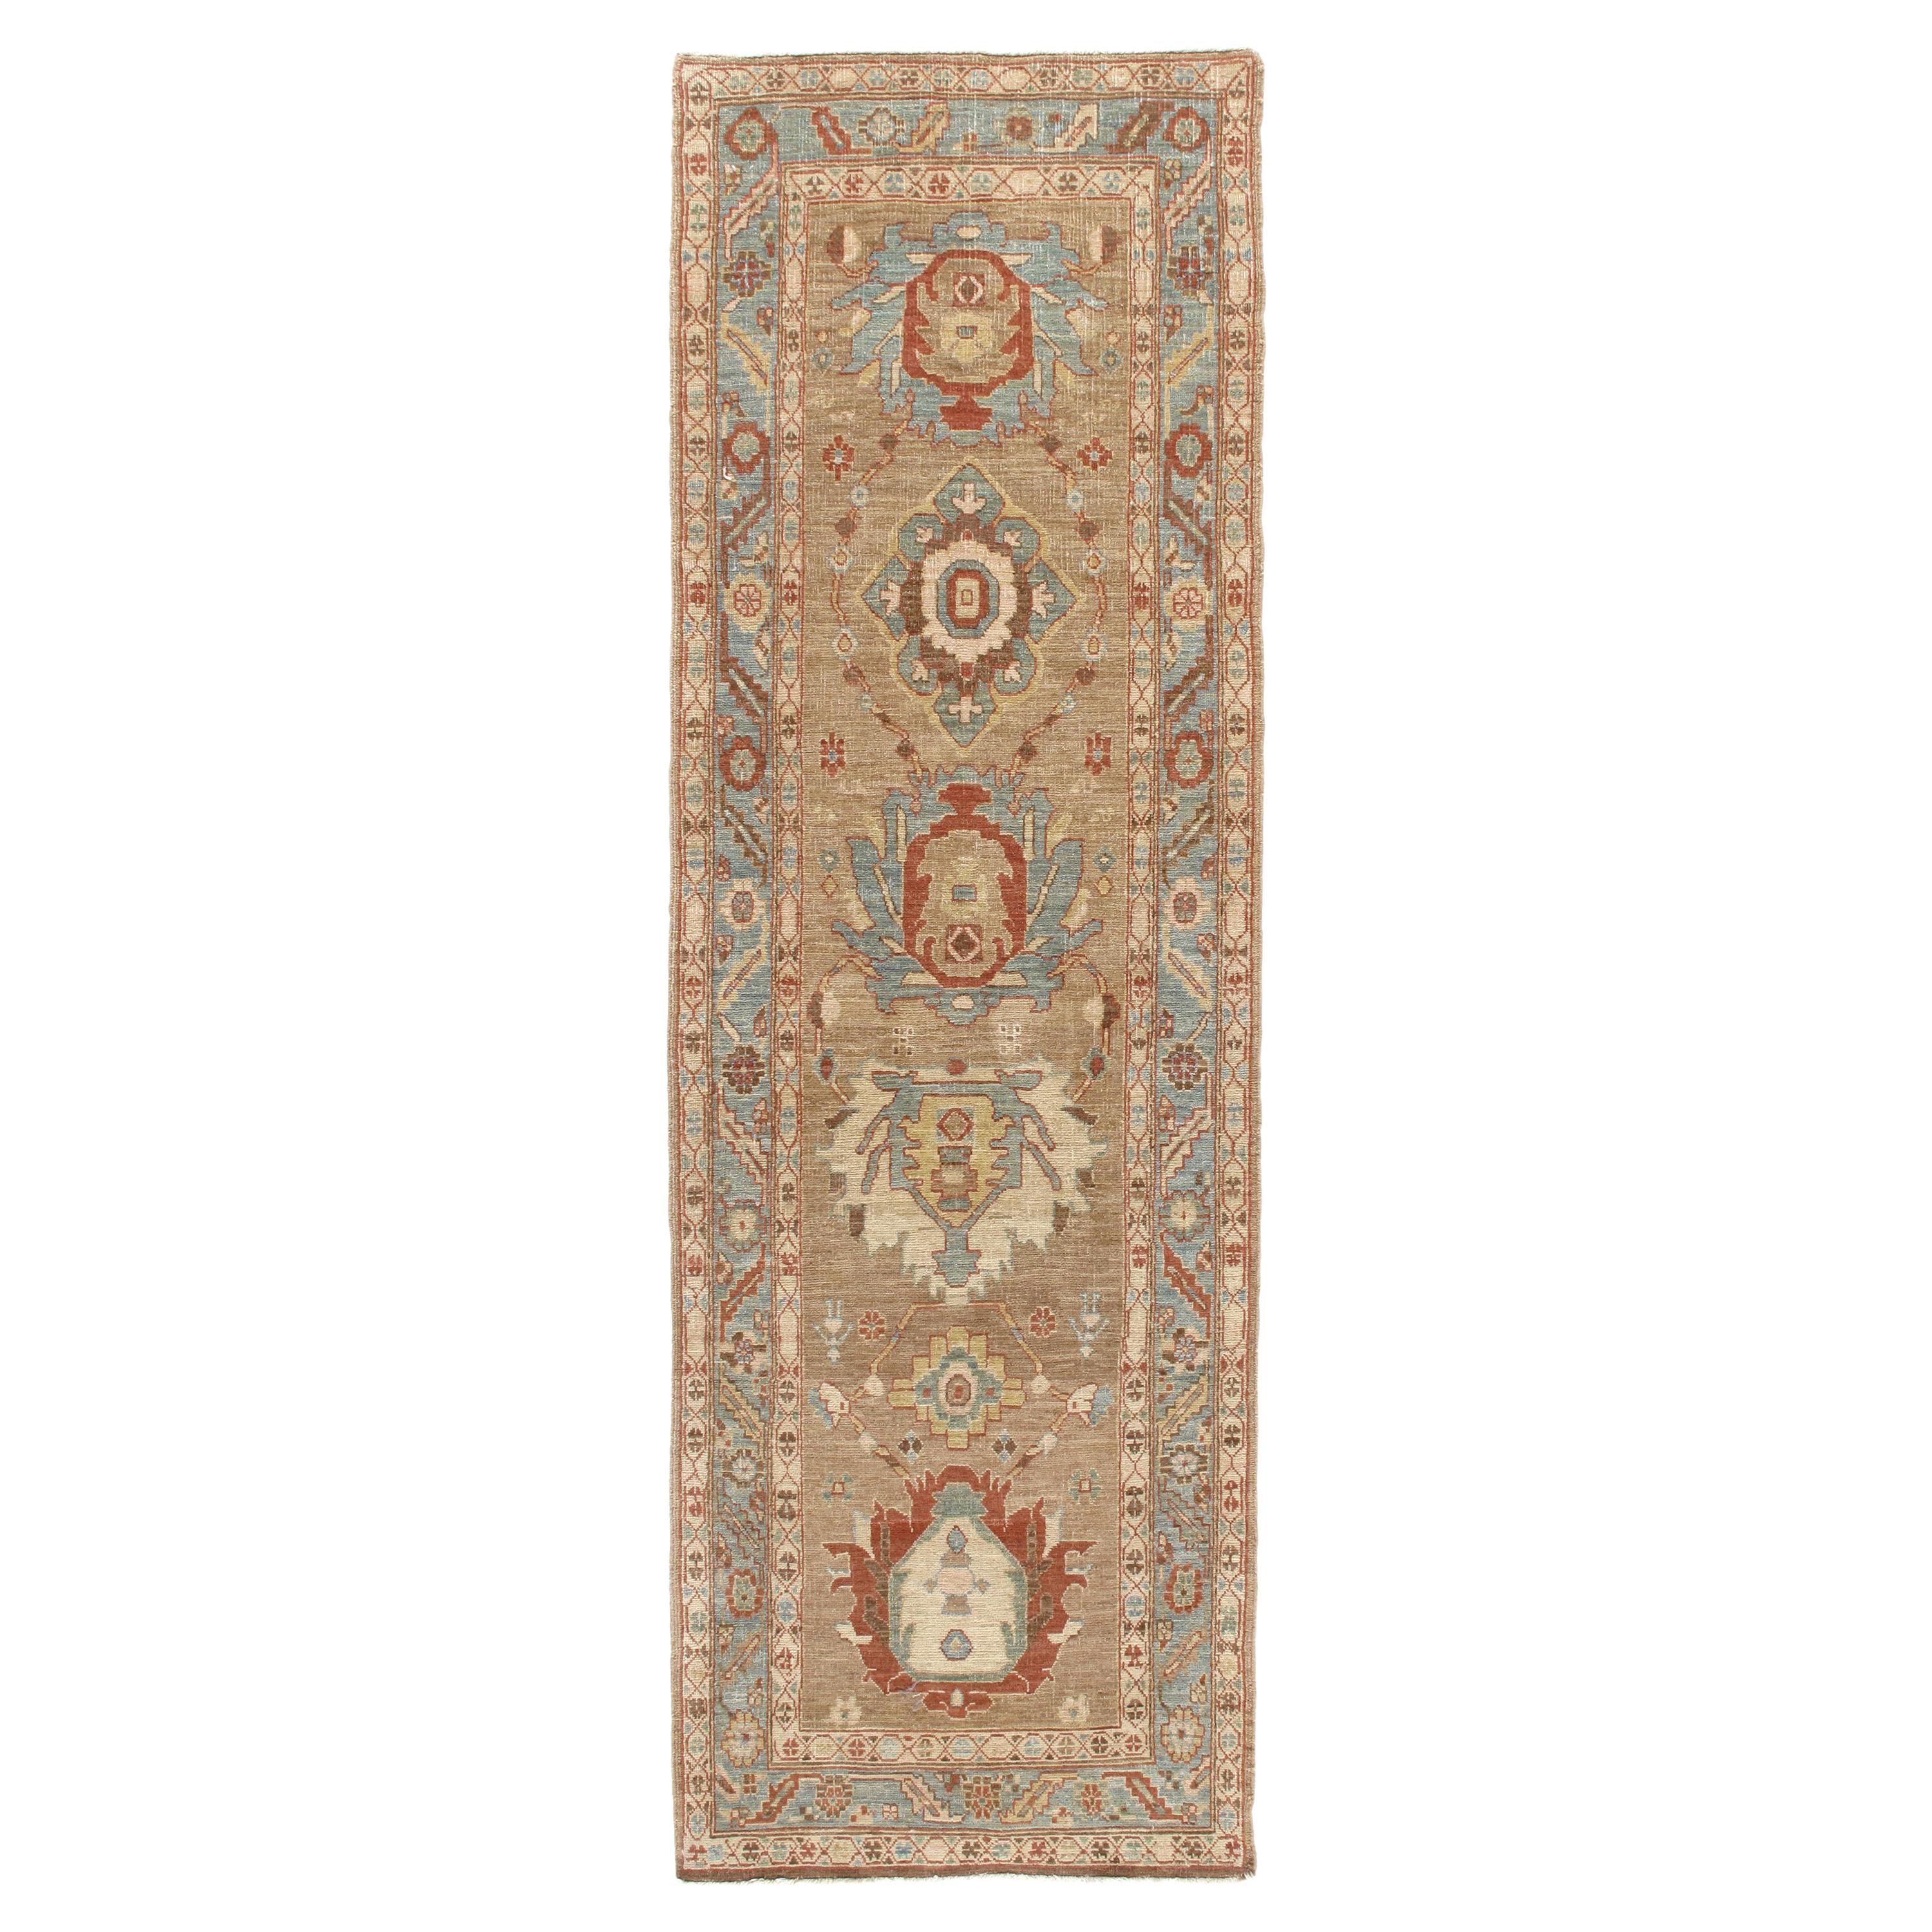 Persian Traditional Bakshaish Hand Knotted Runner in Camel, Blue, Rust Colors